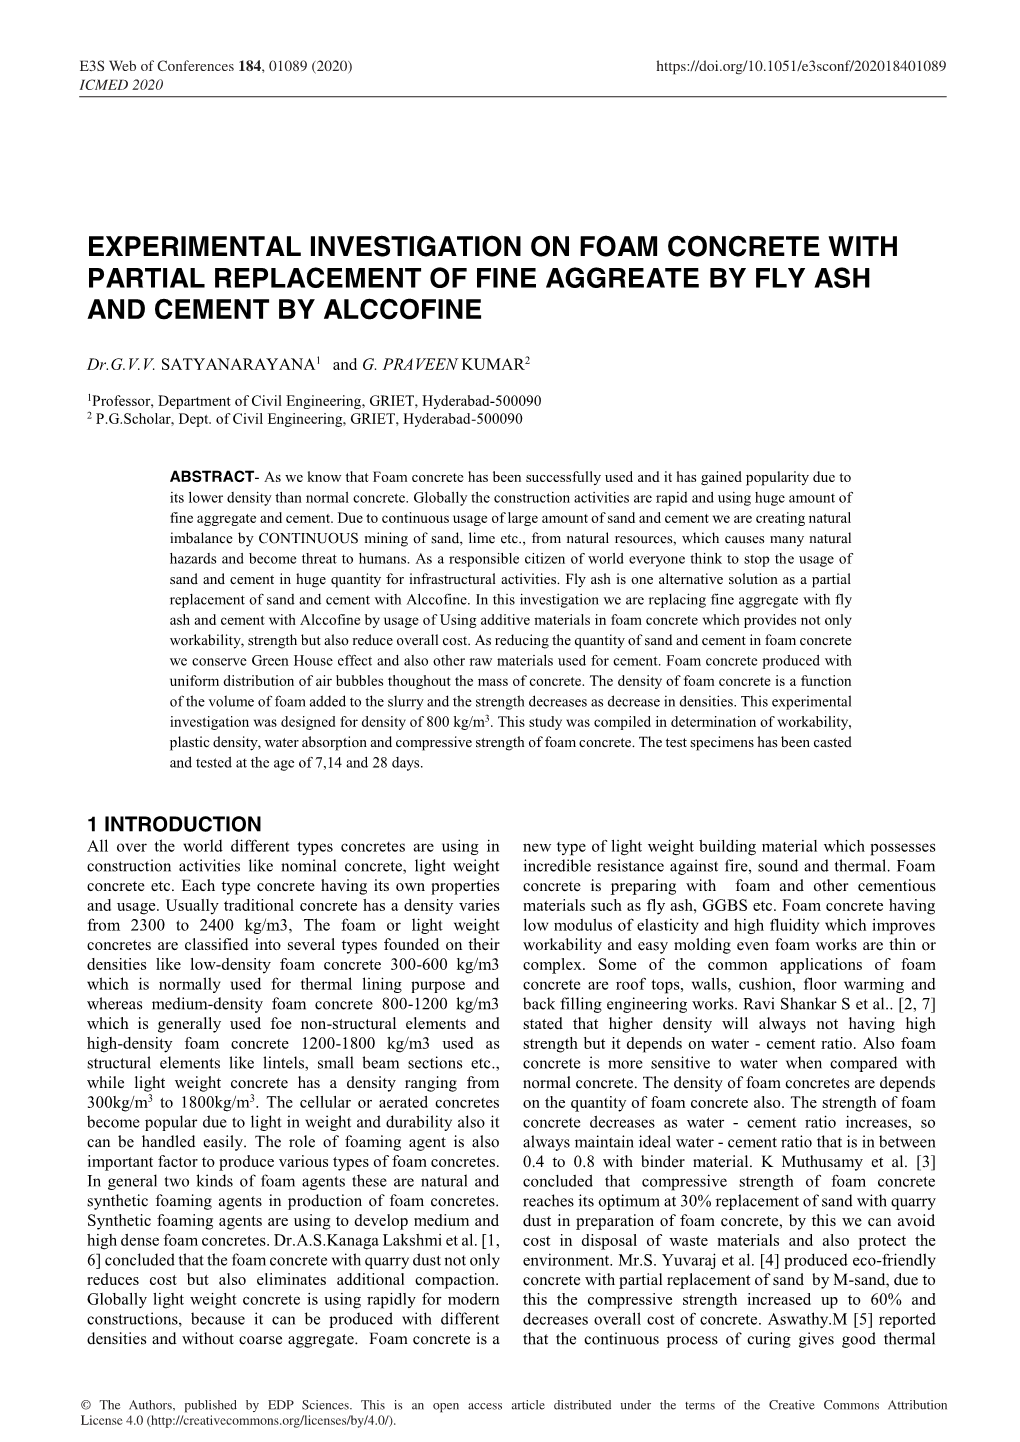 Experimental Investigation on Foam Concrete with Partial Replacement of Fine Aggreate by Fly Ash and Cement by Alccofine